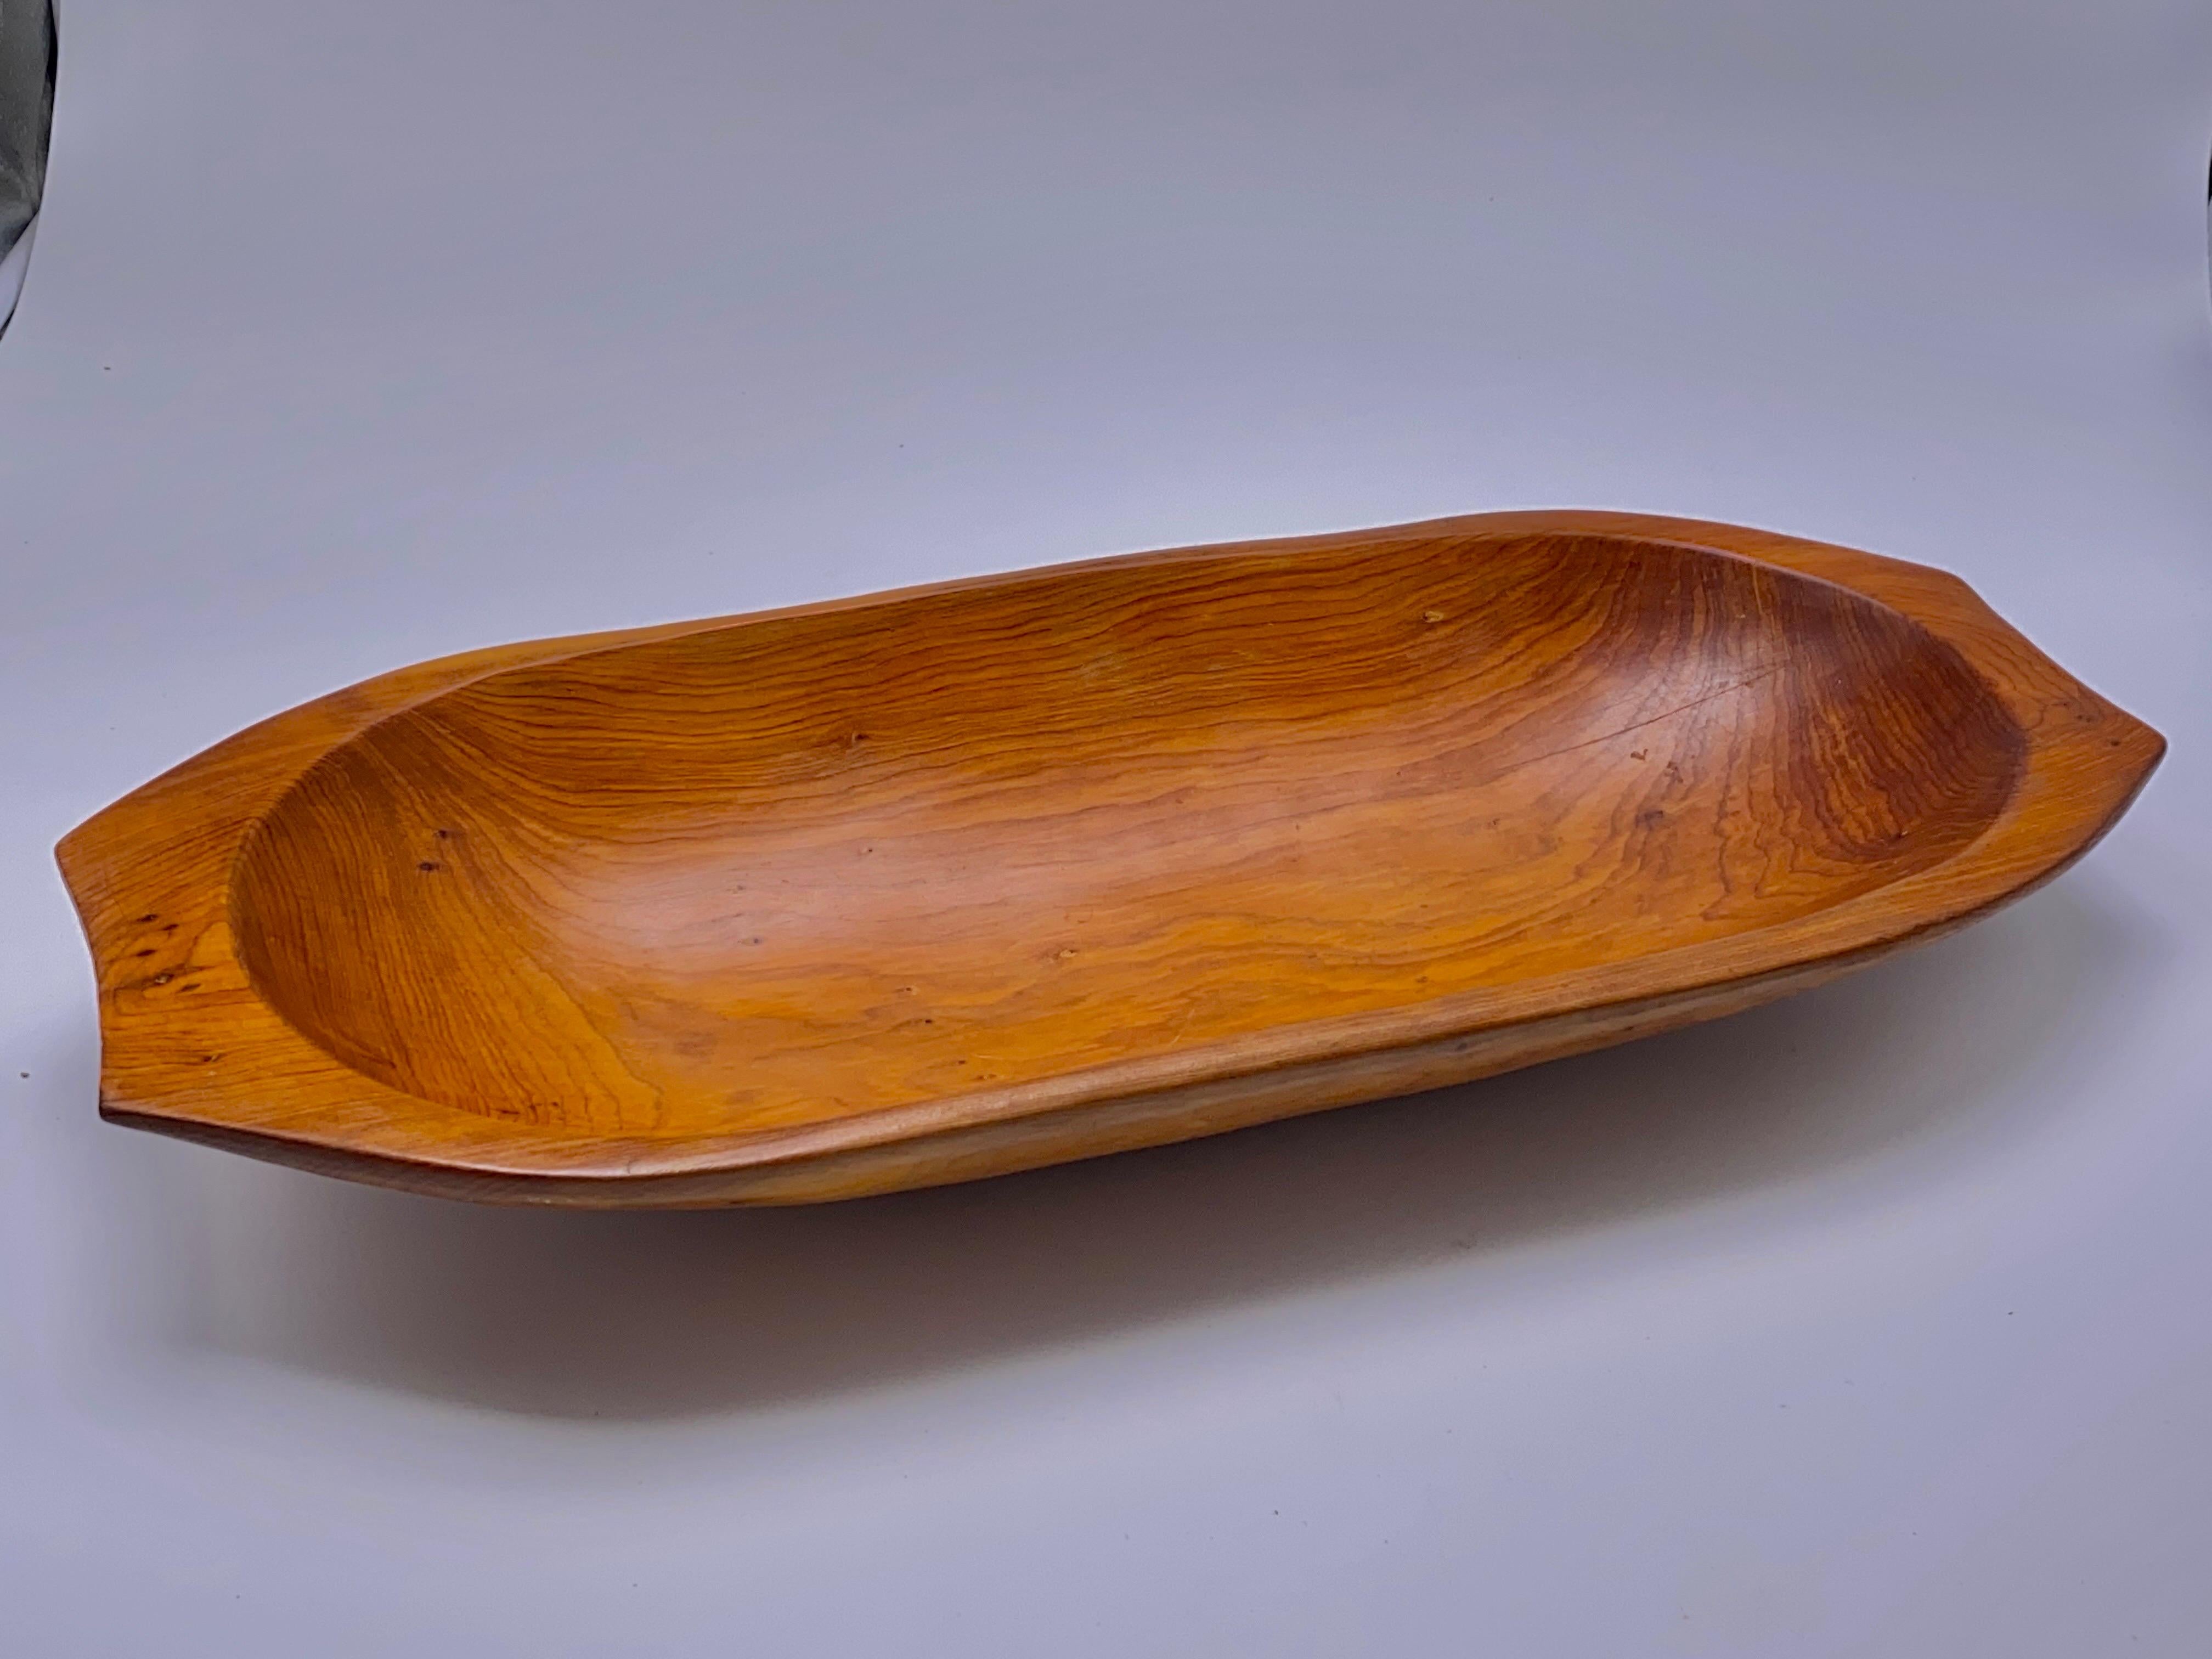 This bowl in a brown color, is quite large. Can be used as a basket, a vide poche, or just as a decorative item.
It has been made in wood, in sweden circa 1960.